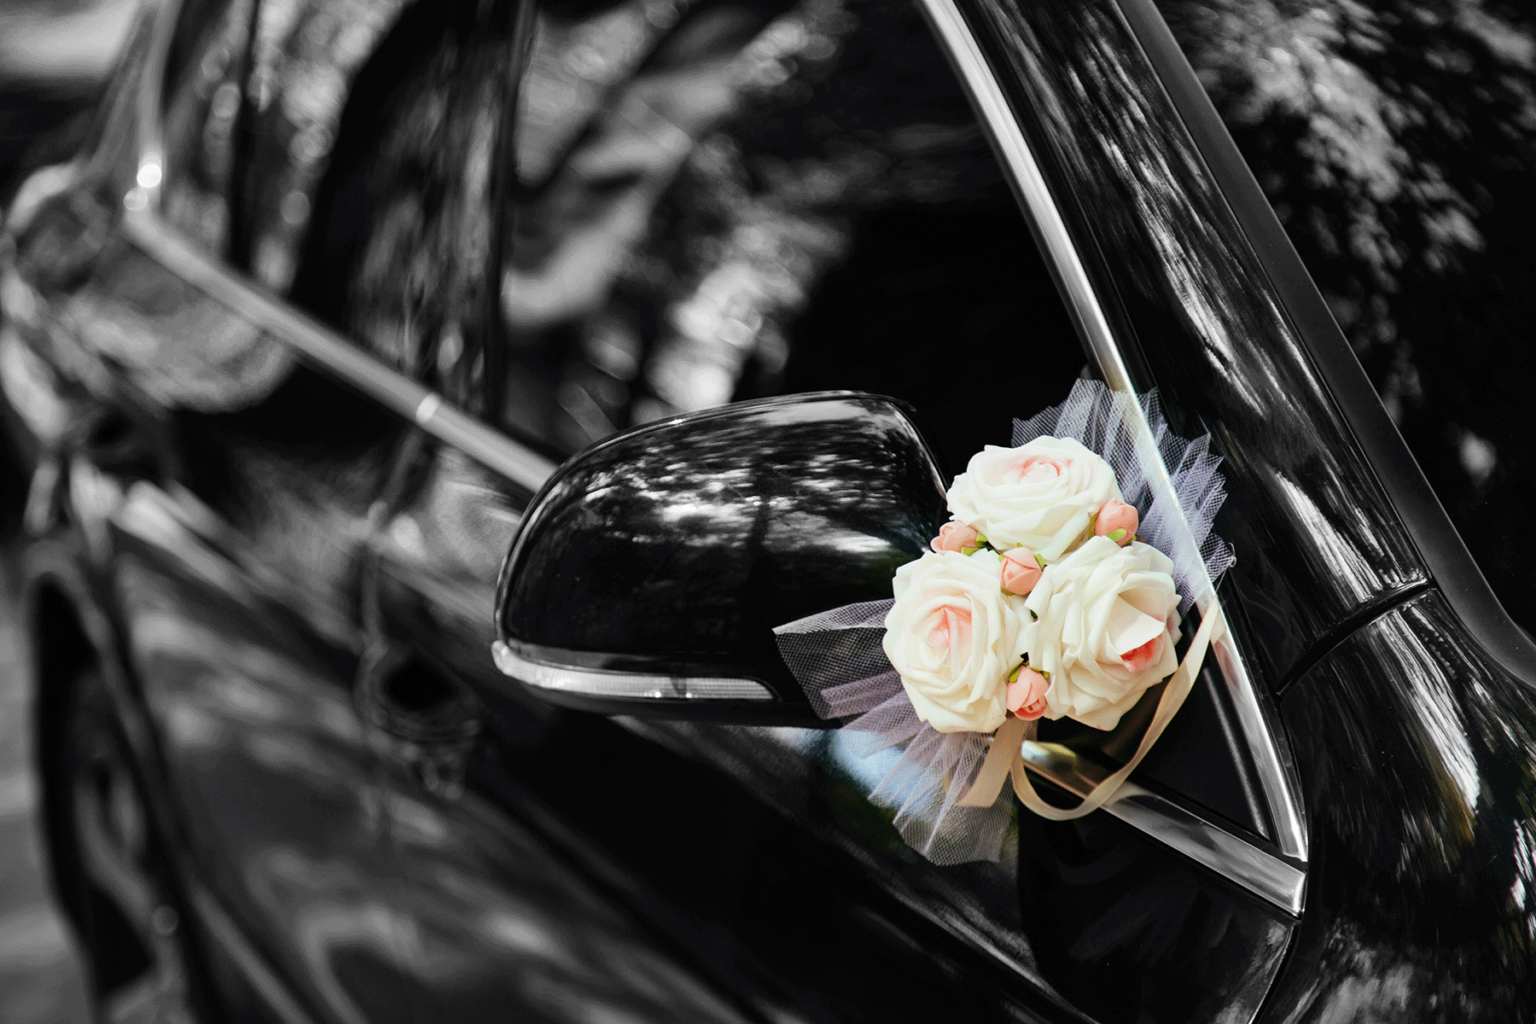 Planning wedding transportation early can help you get exactly what you're looking for within your budget.